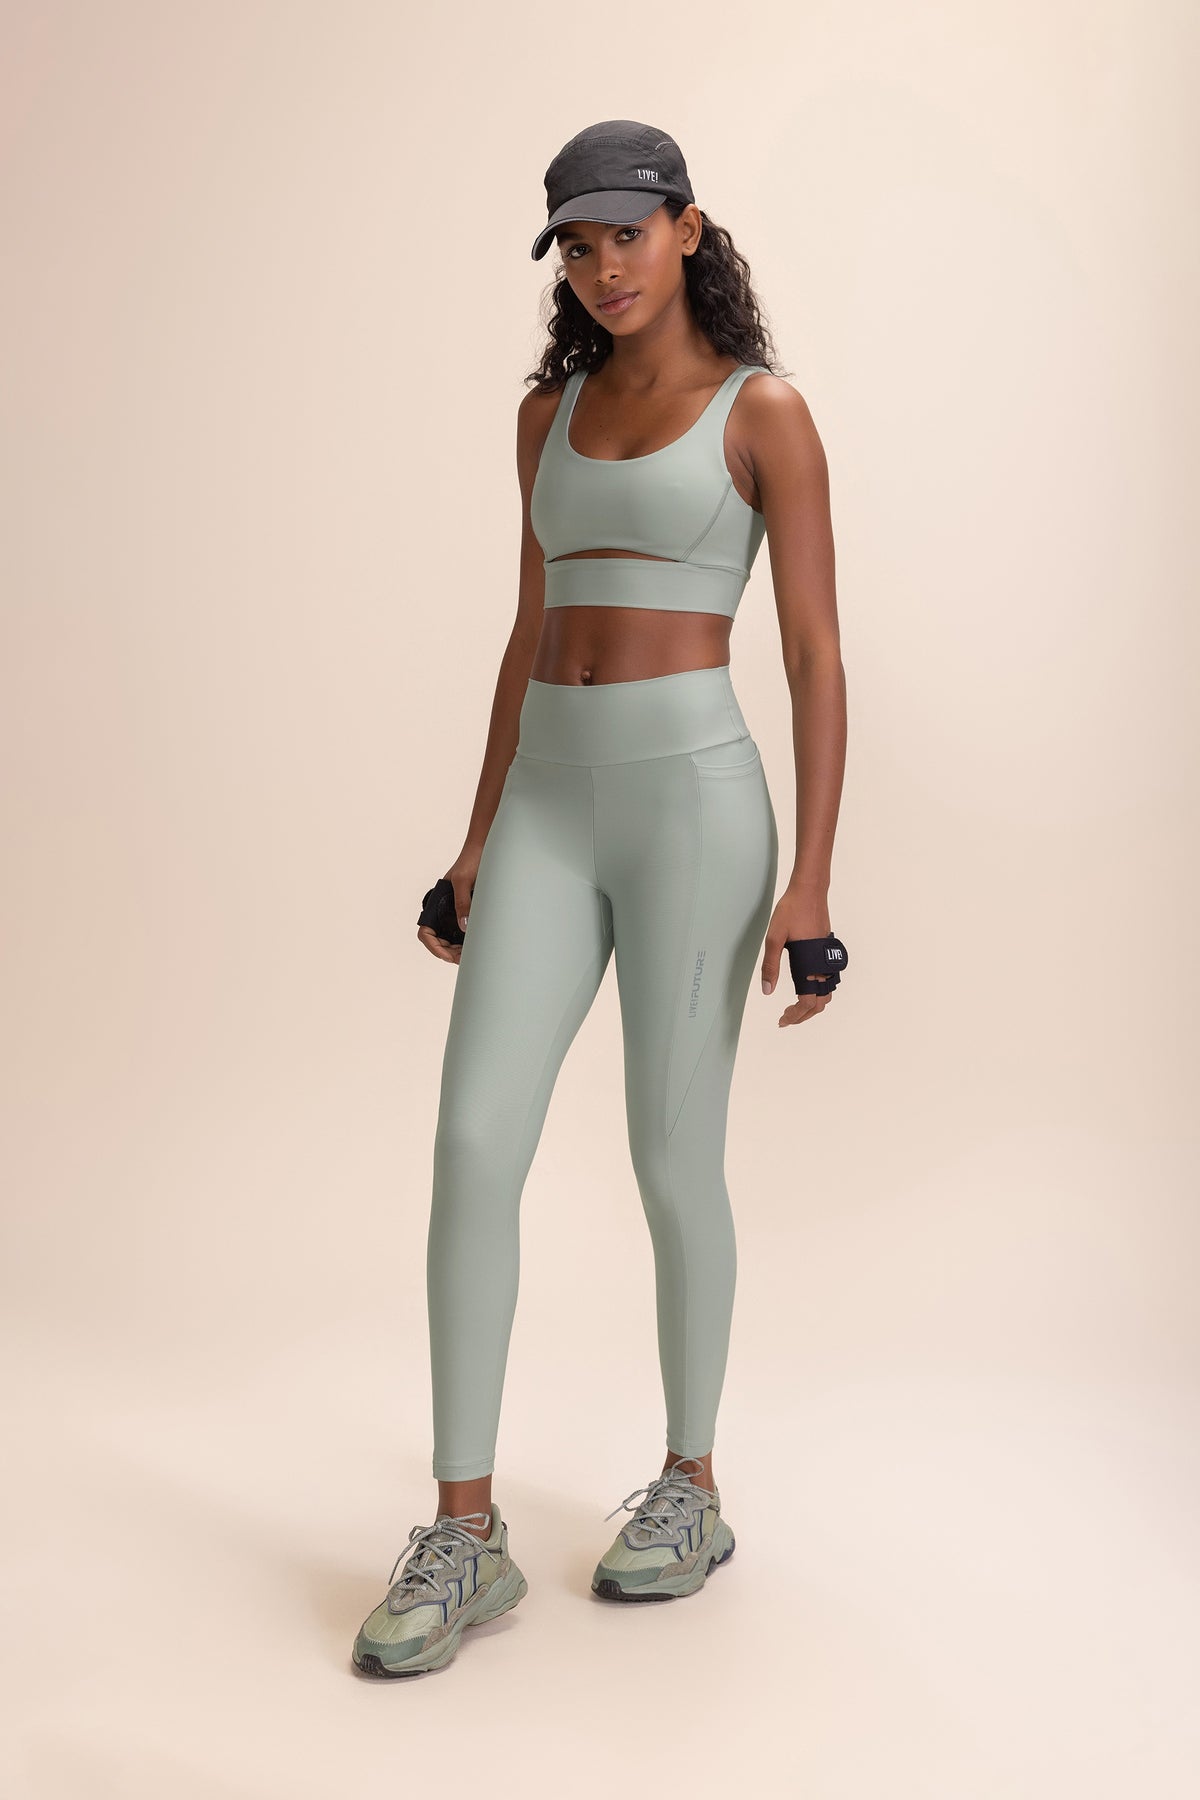 Alki'i Luxurious Cotton Lycra Fold over Yoga Pants, Plum L,  price  tracker / tracking,  price history charts,  price watches,   price drop alerts